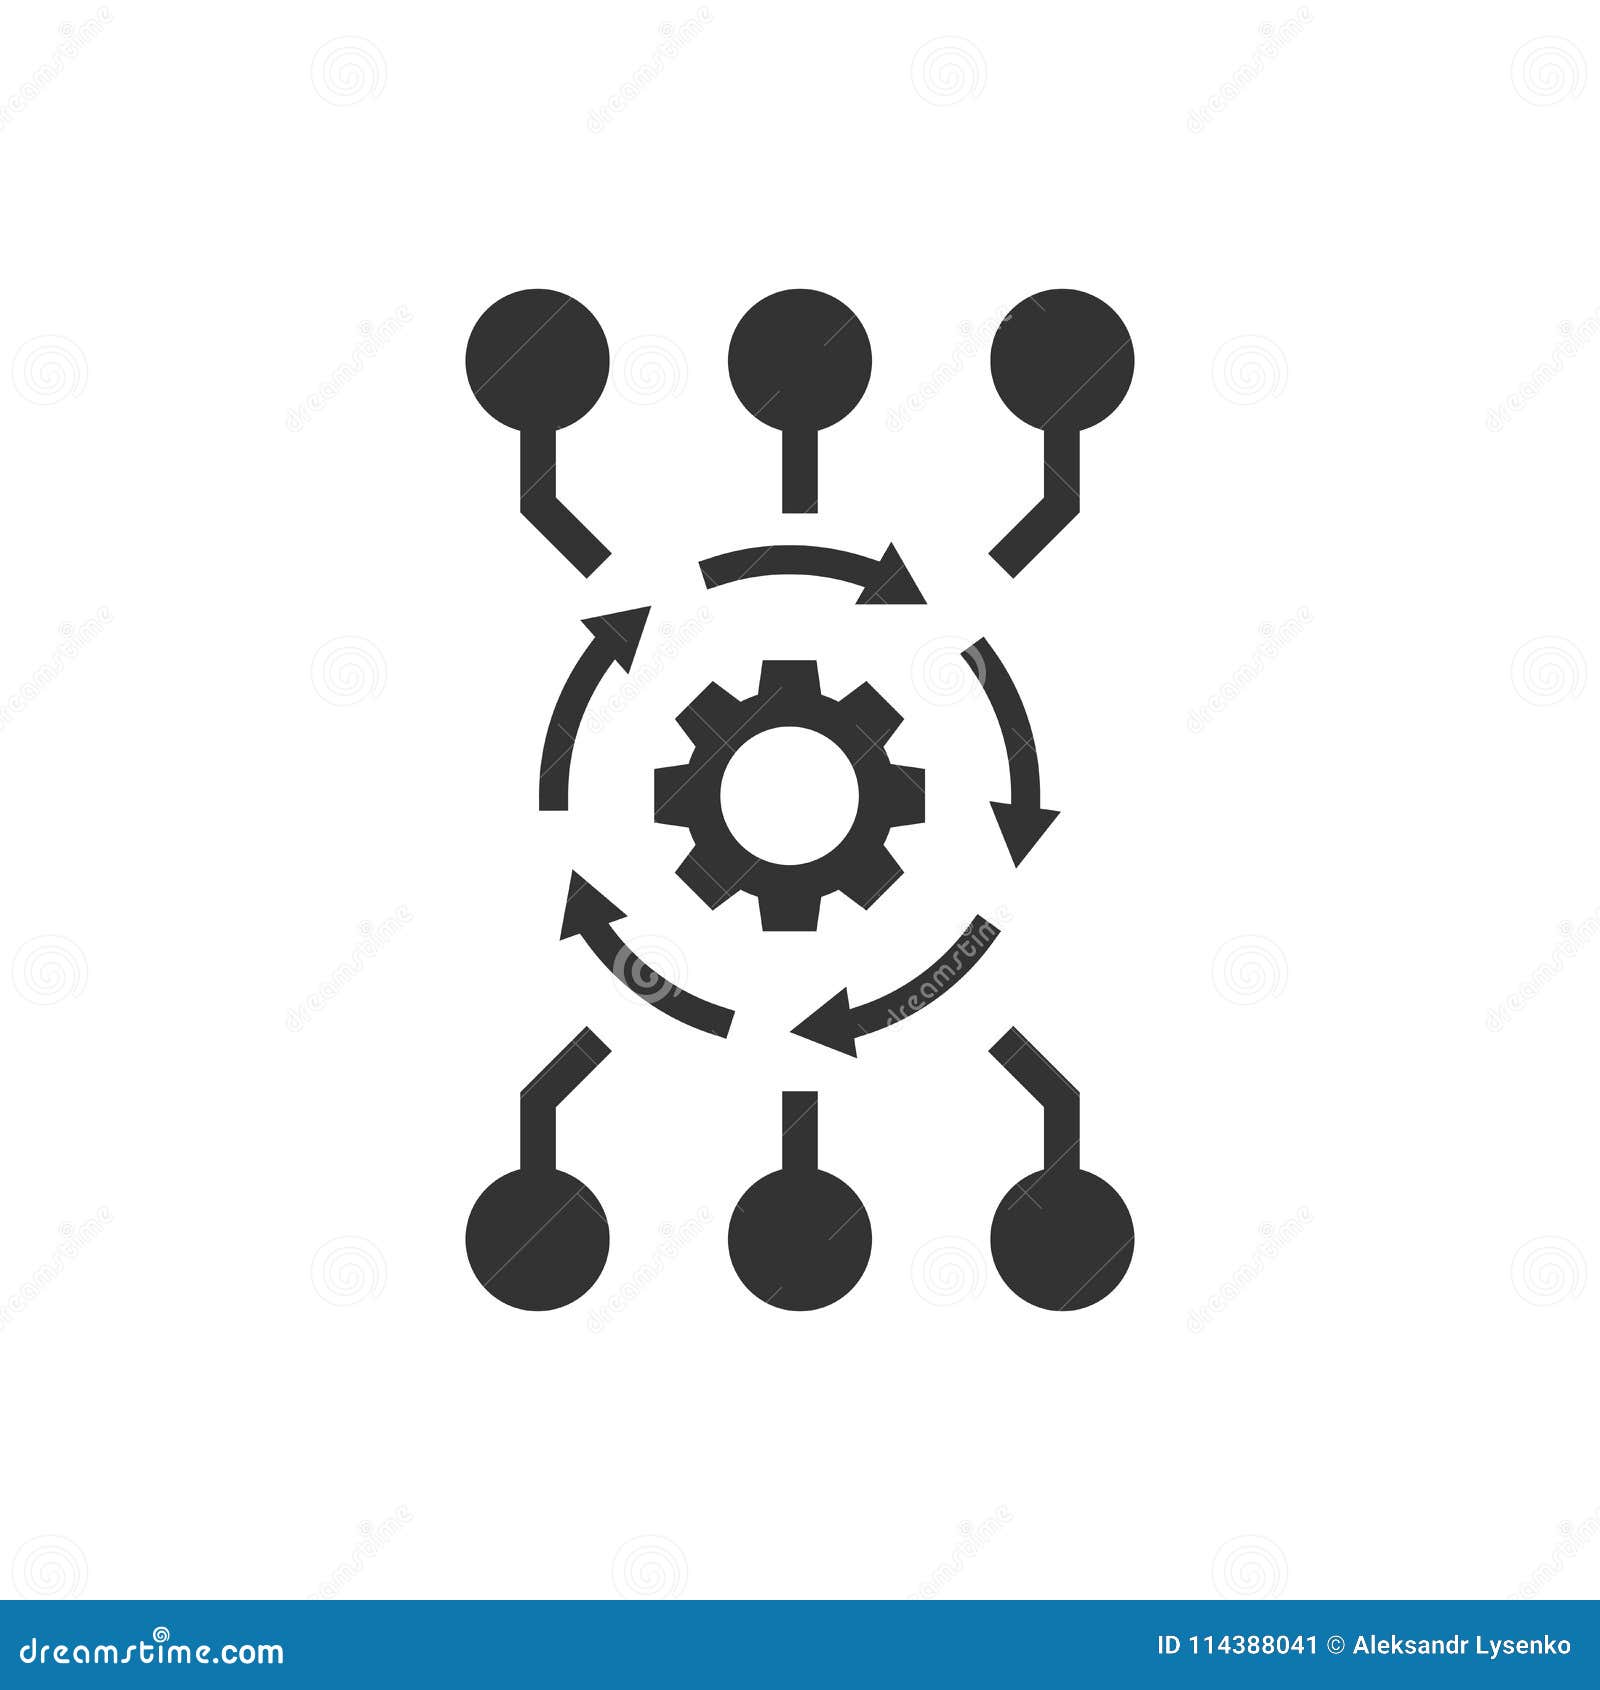 algorithm api software  icon in flat style. business gear